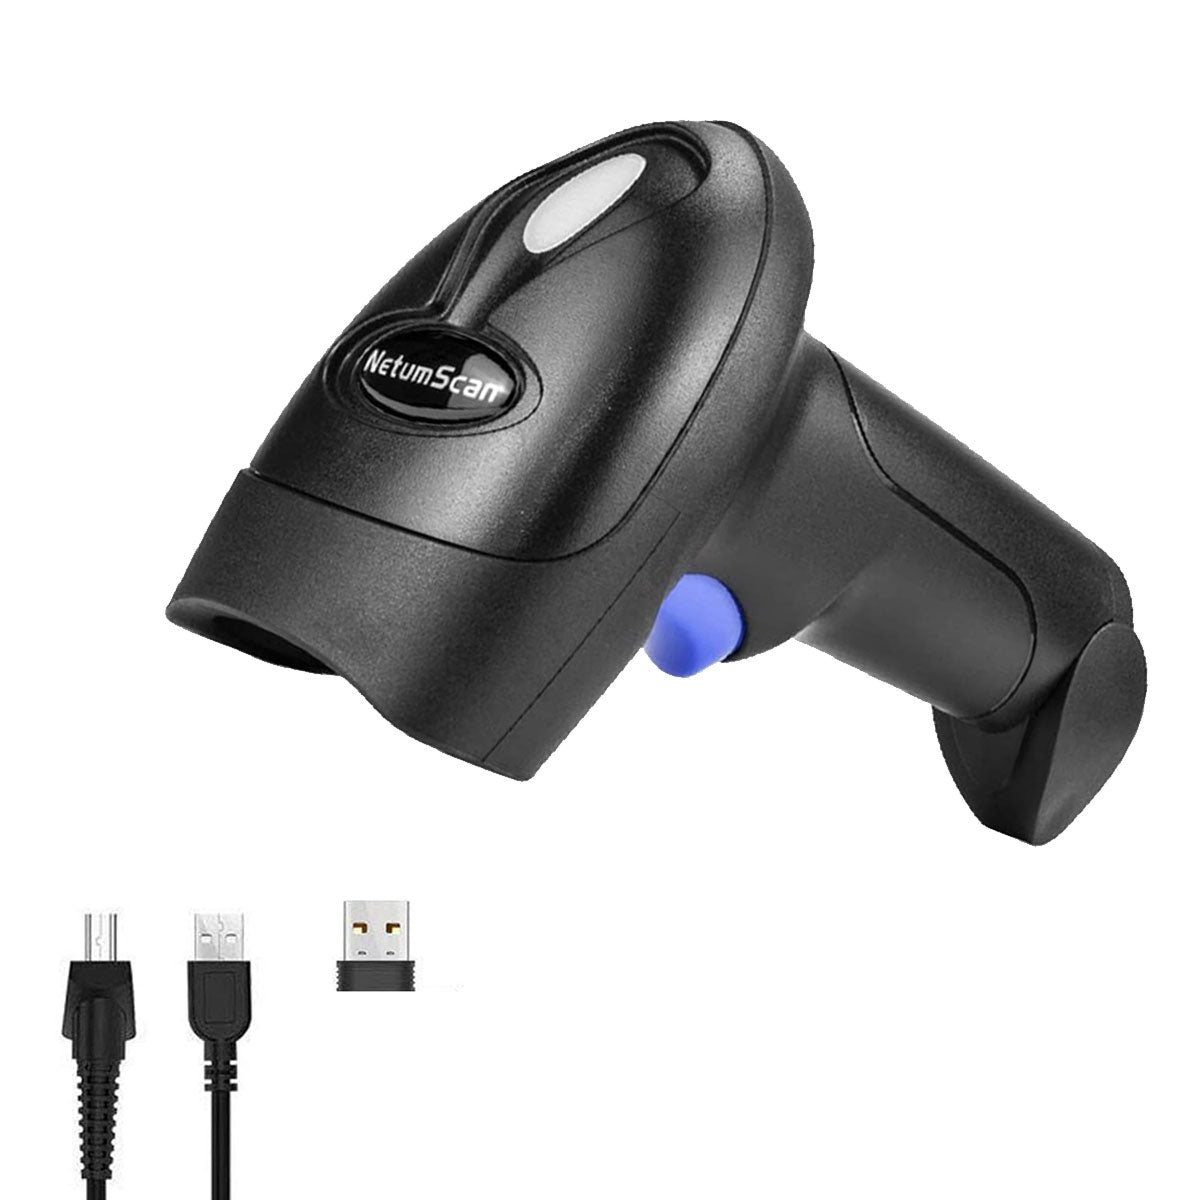 "Save up to $1000!!" 100 pcs of Model L8 Wireless QR Barcode Scanner, 2.4G Wireless USB Automatic 2D Bar Code Reader for Laptop or Computer PC